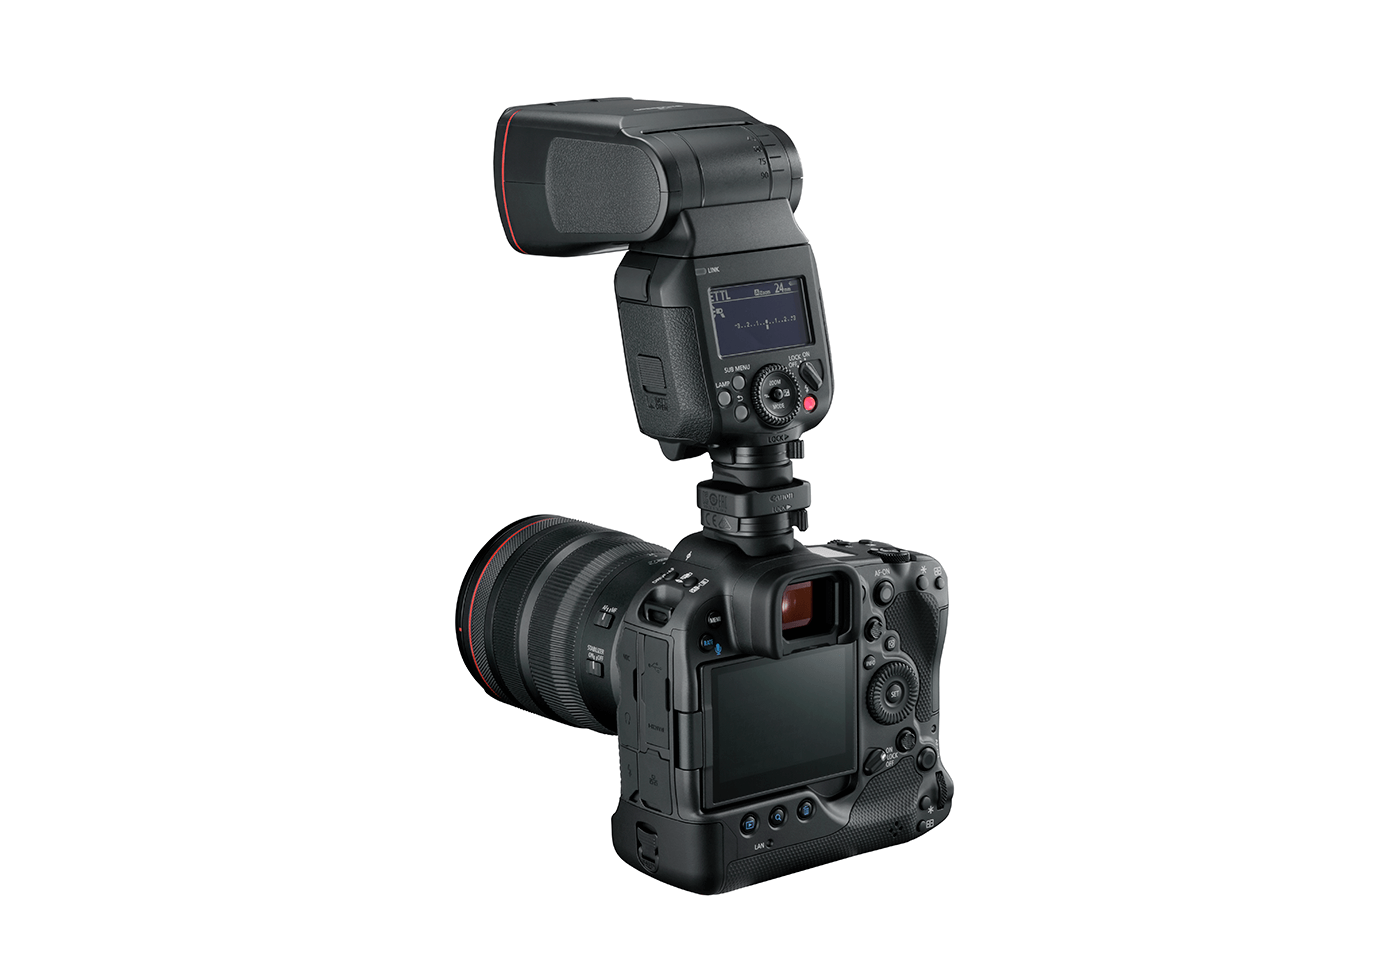 Multi-function shoe adapter AE-D1 on an EOS R3